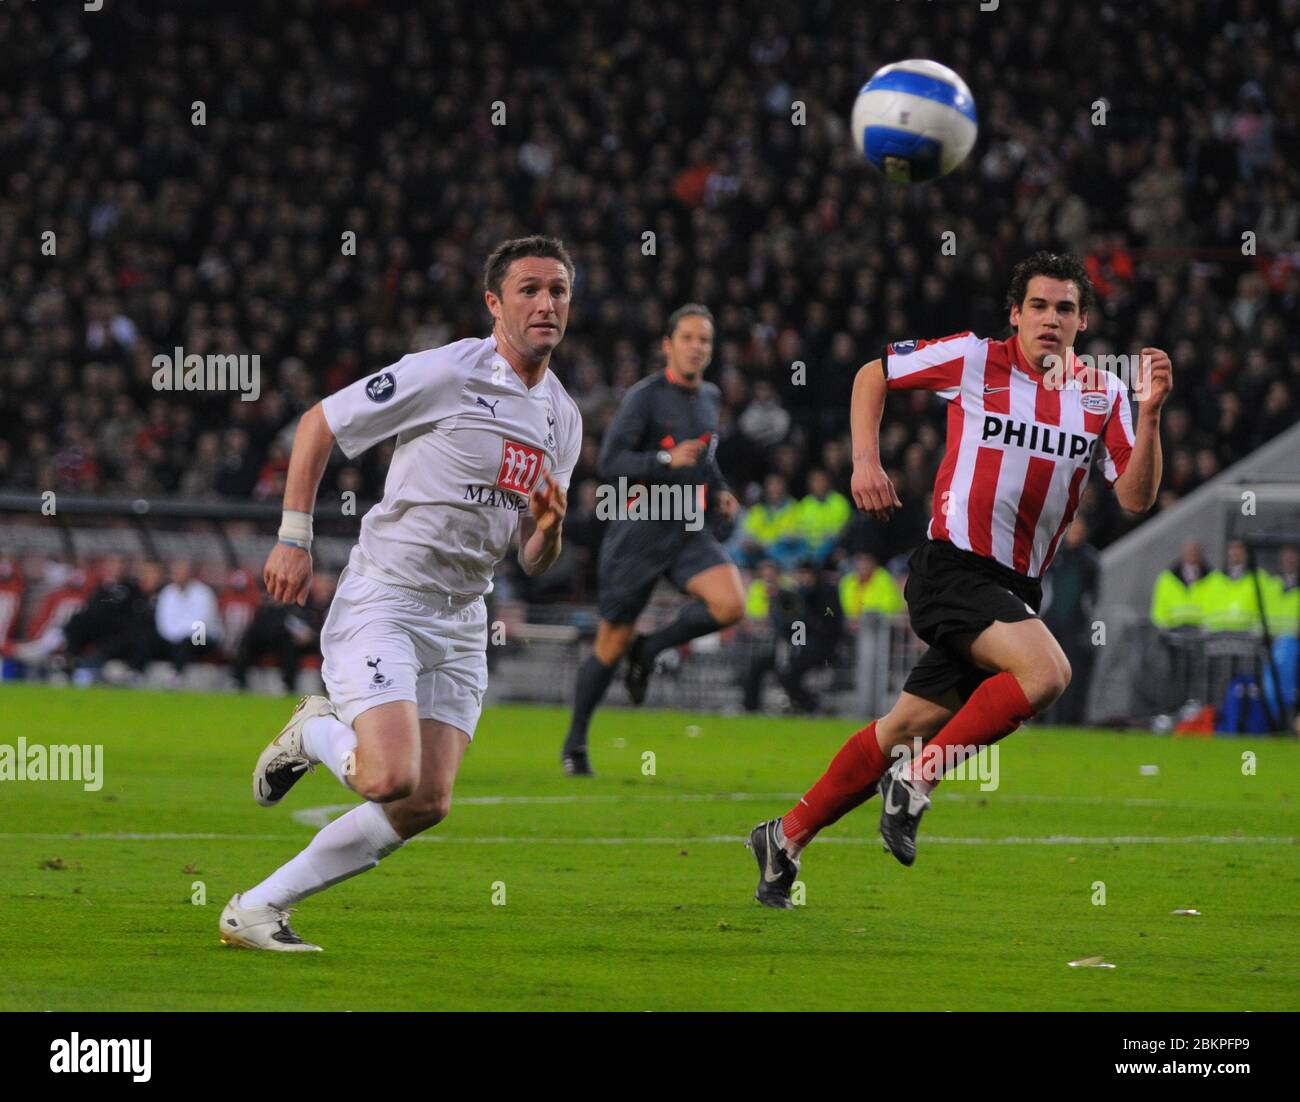 EINDHOVEN, NEDERLAND. MARCH 12: Robbie Keane of Tottenham Hotspur During UEFA Cup Round of 16 Second Leg between PSV Eindhoven and Tottenham Hotspur a Stock Photo